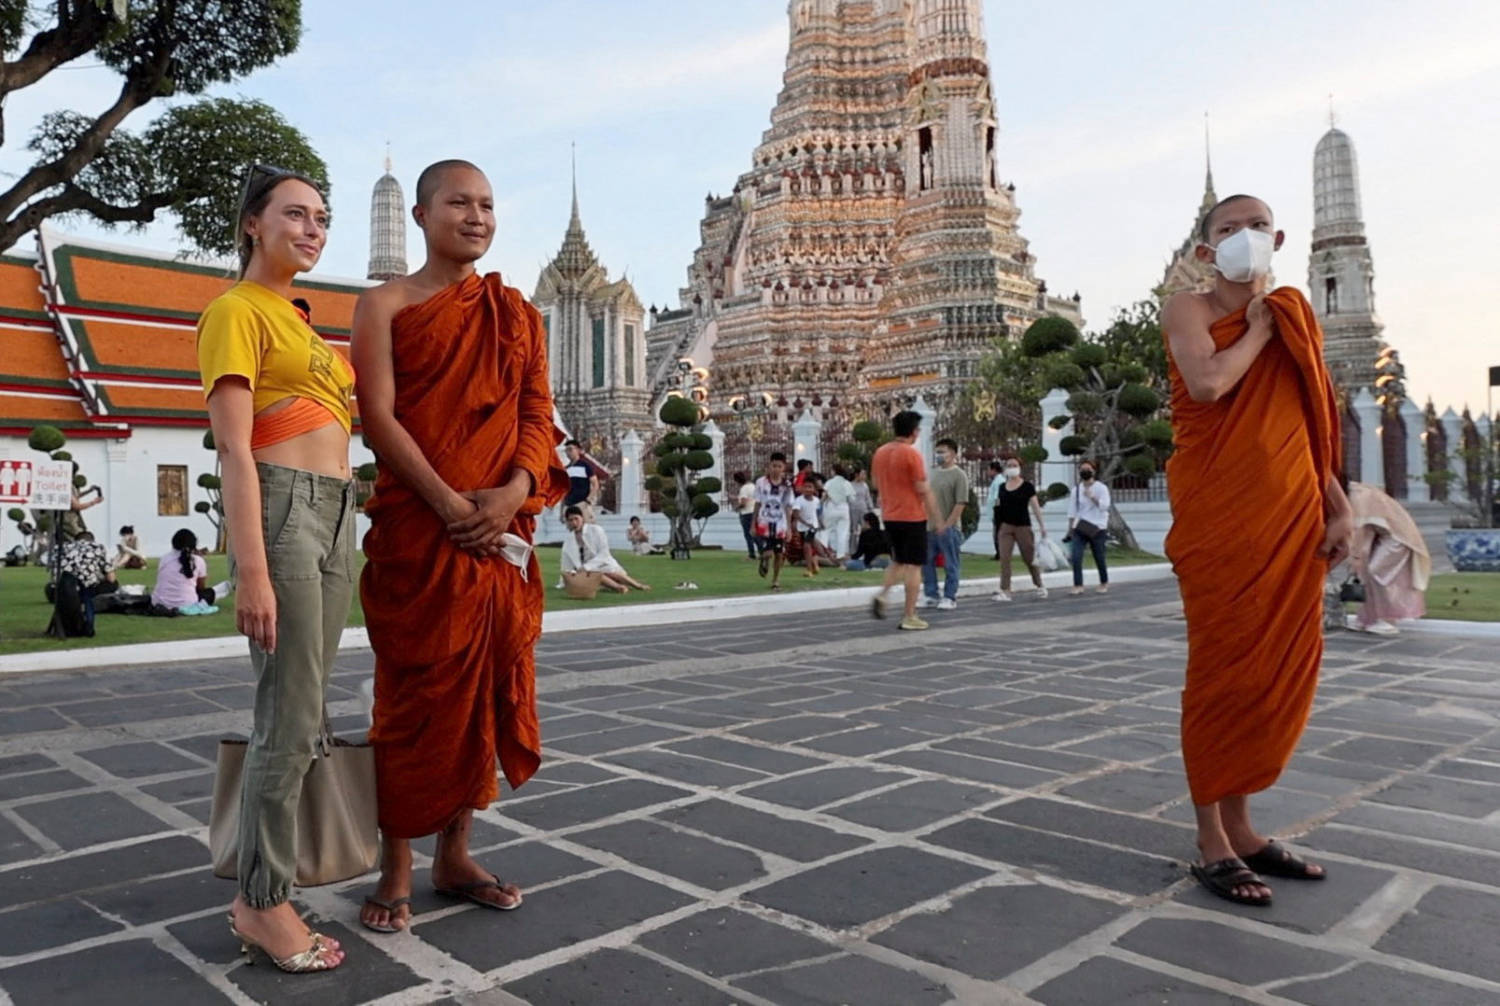 Lillian Smith, 30, From Mississippi, Poses For A Picture With Monks In Bangkok